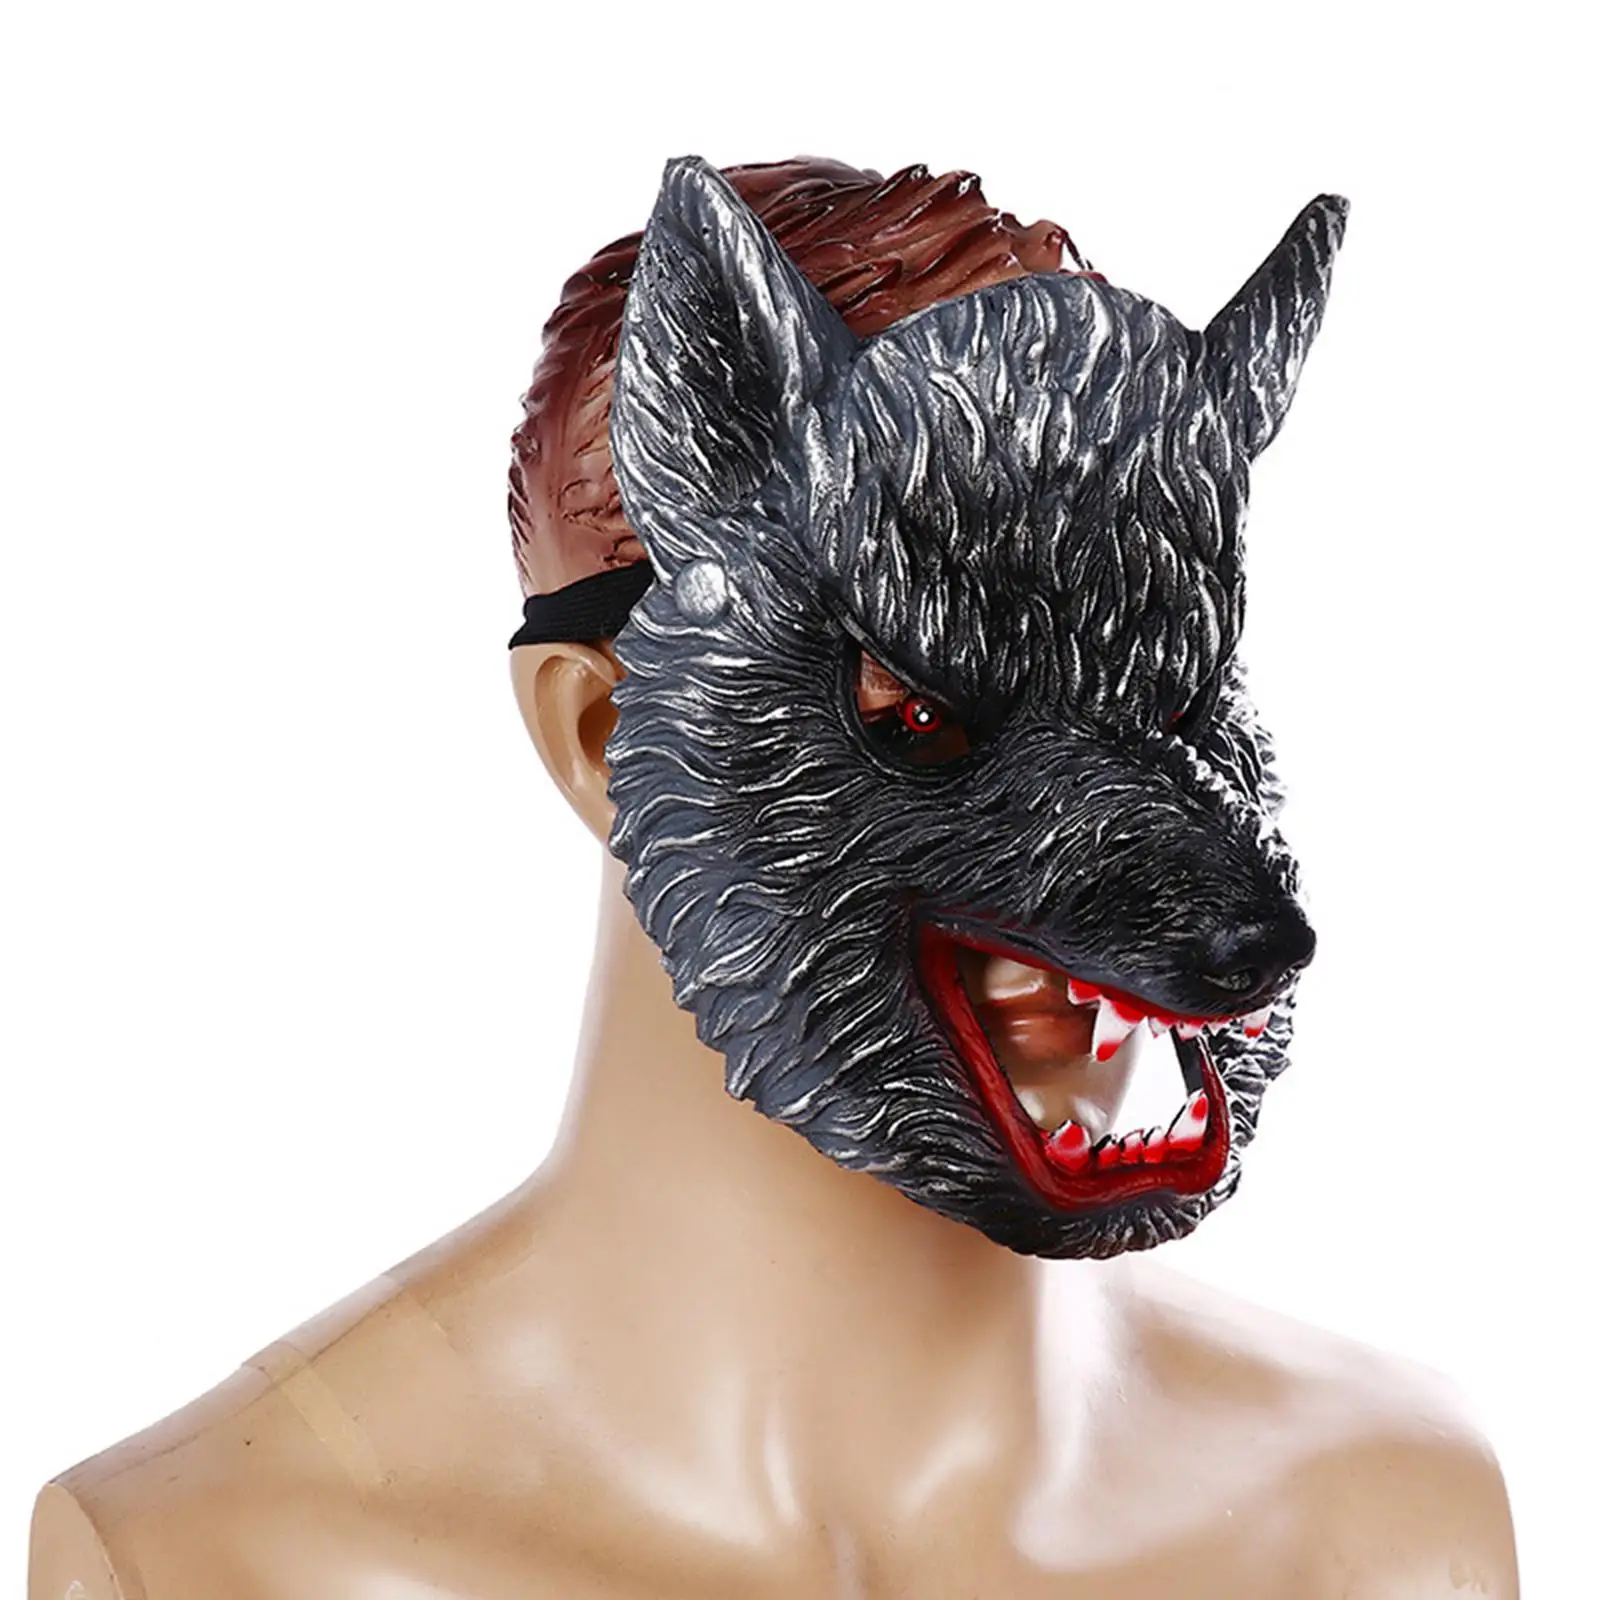 Halloween Wolf Mask Masquerade Cosplay Costume Accessories Party Supplies Animal Werewolf Half Face for Adults Movie Theme